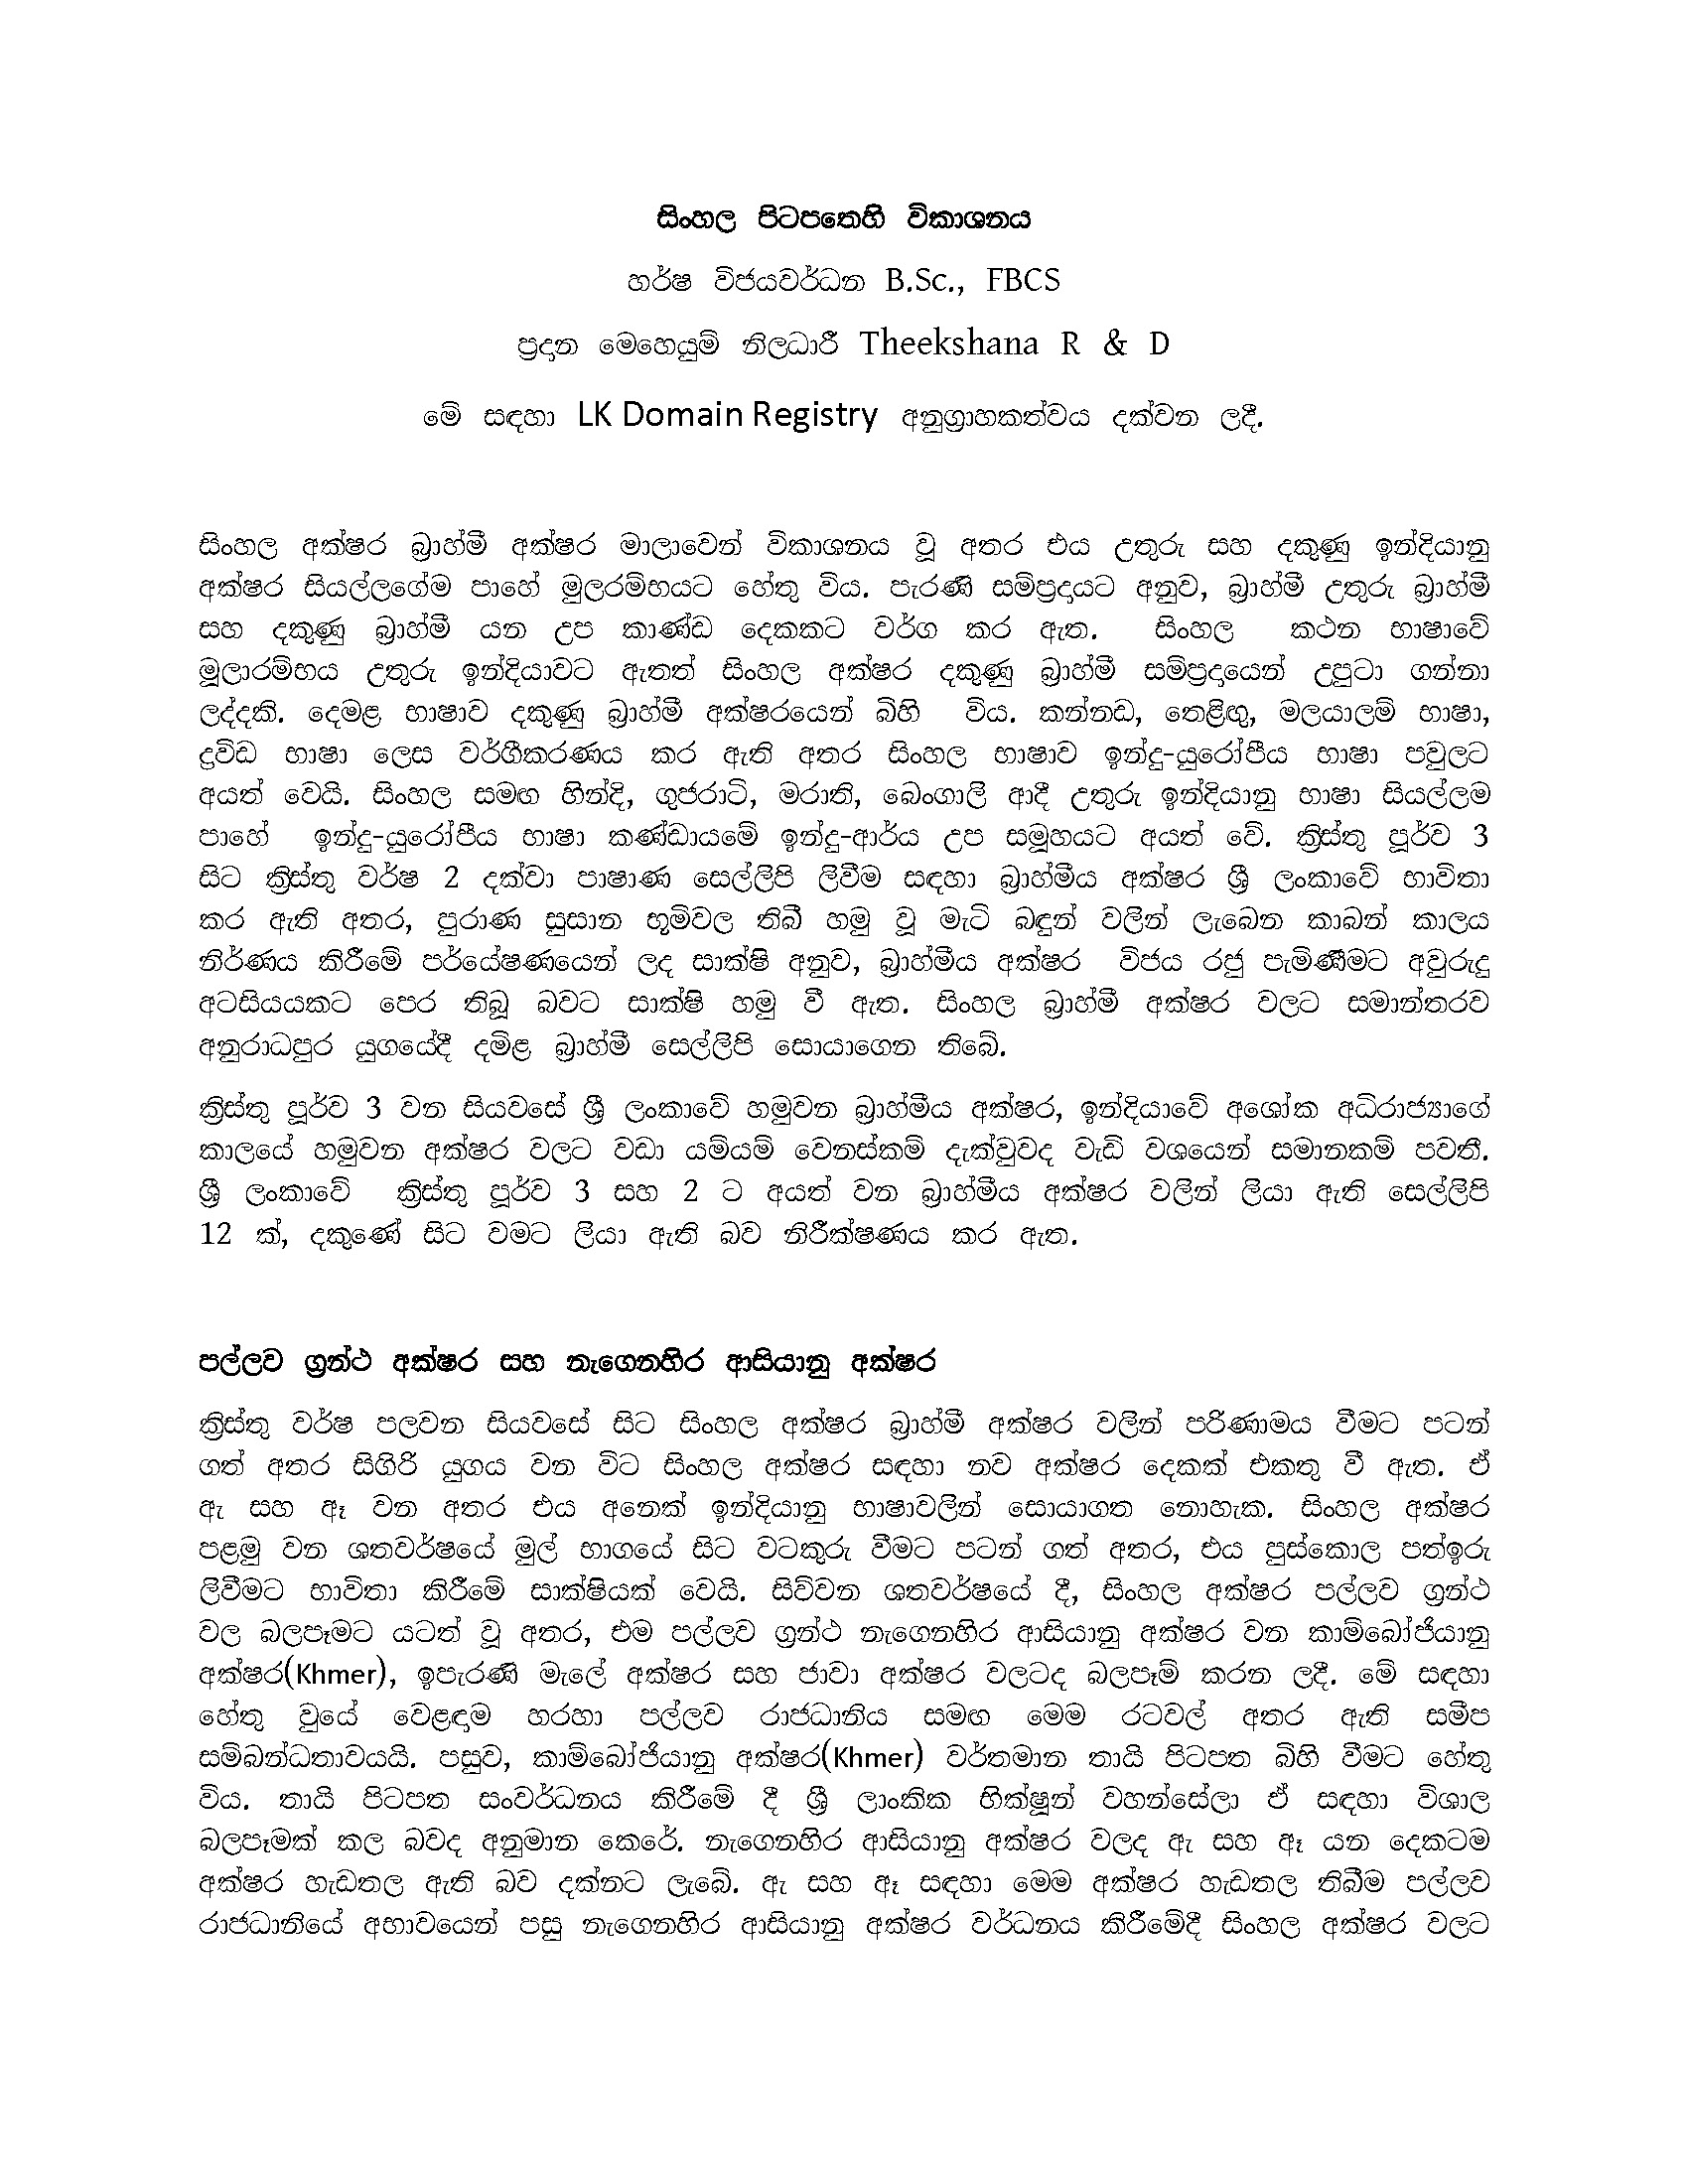 Today in this article we are talking about the Evolution of the Sinhala Script.